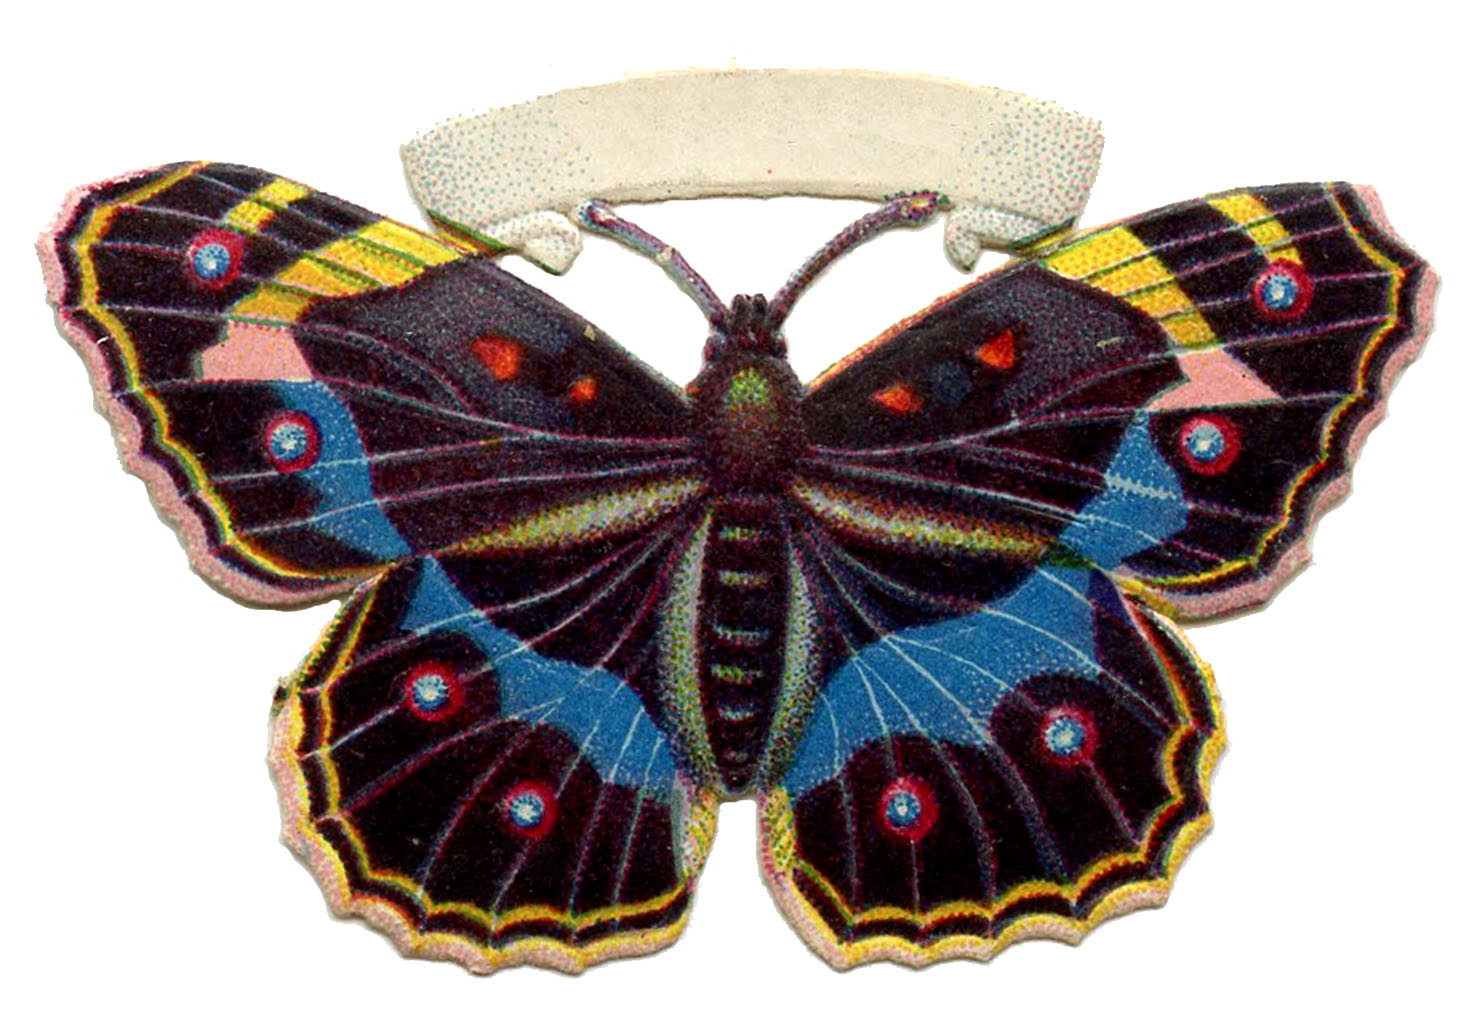 http://thegraphicsfairy.com/wp-content/uploads/2013/06/Butterfly-Vintage-Image-spotted-GraphicsFairy.jpg